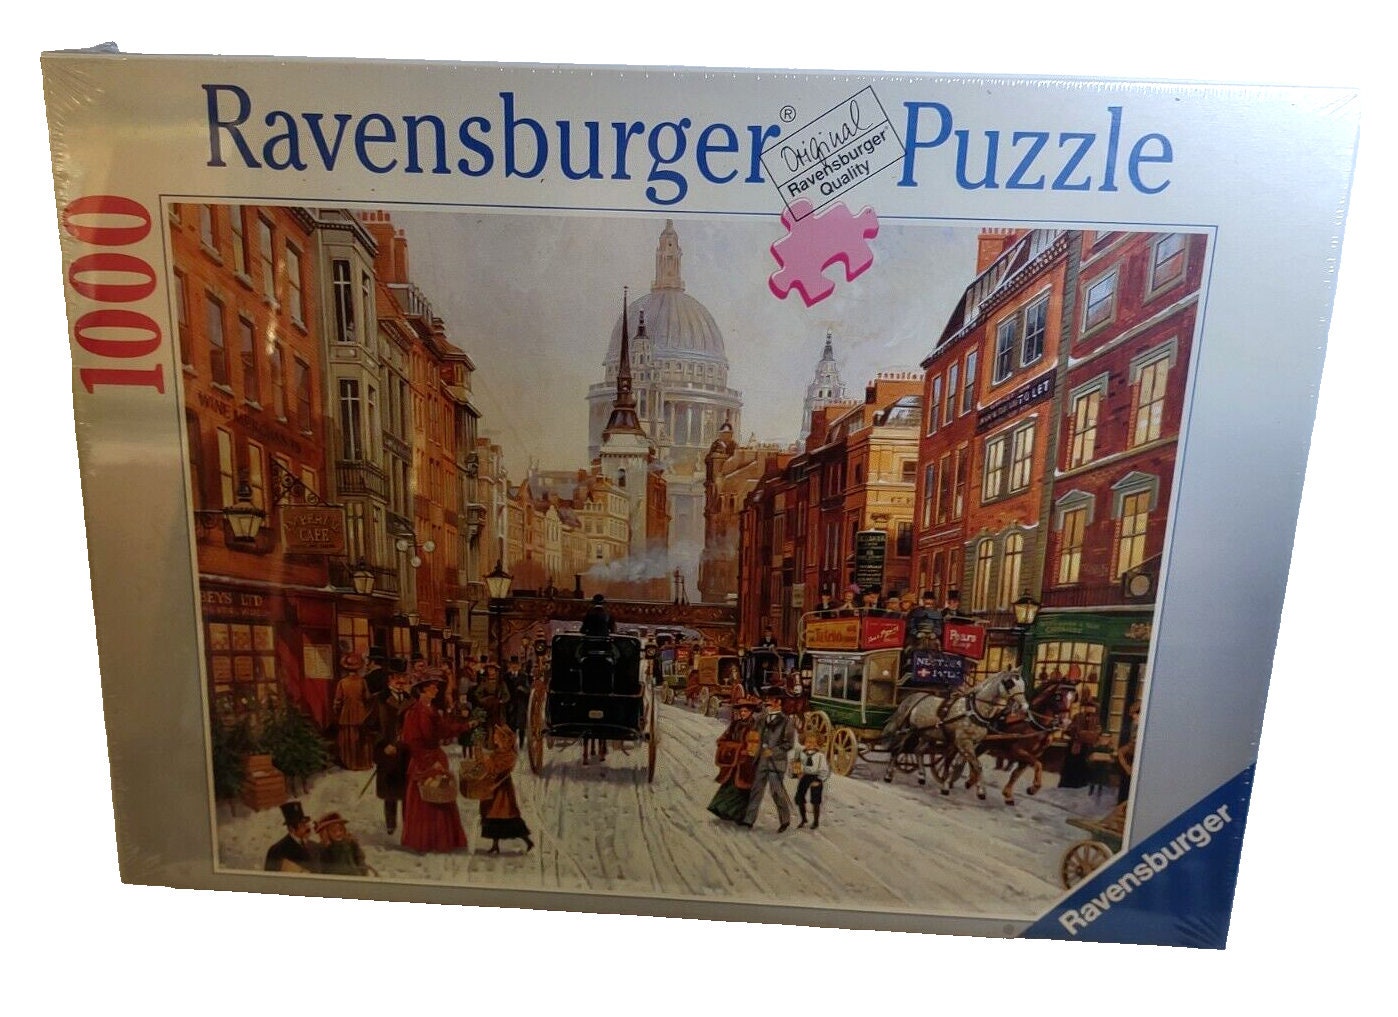 1500, Ravensburger, Castle at the Seaside - Rare Puzzles